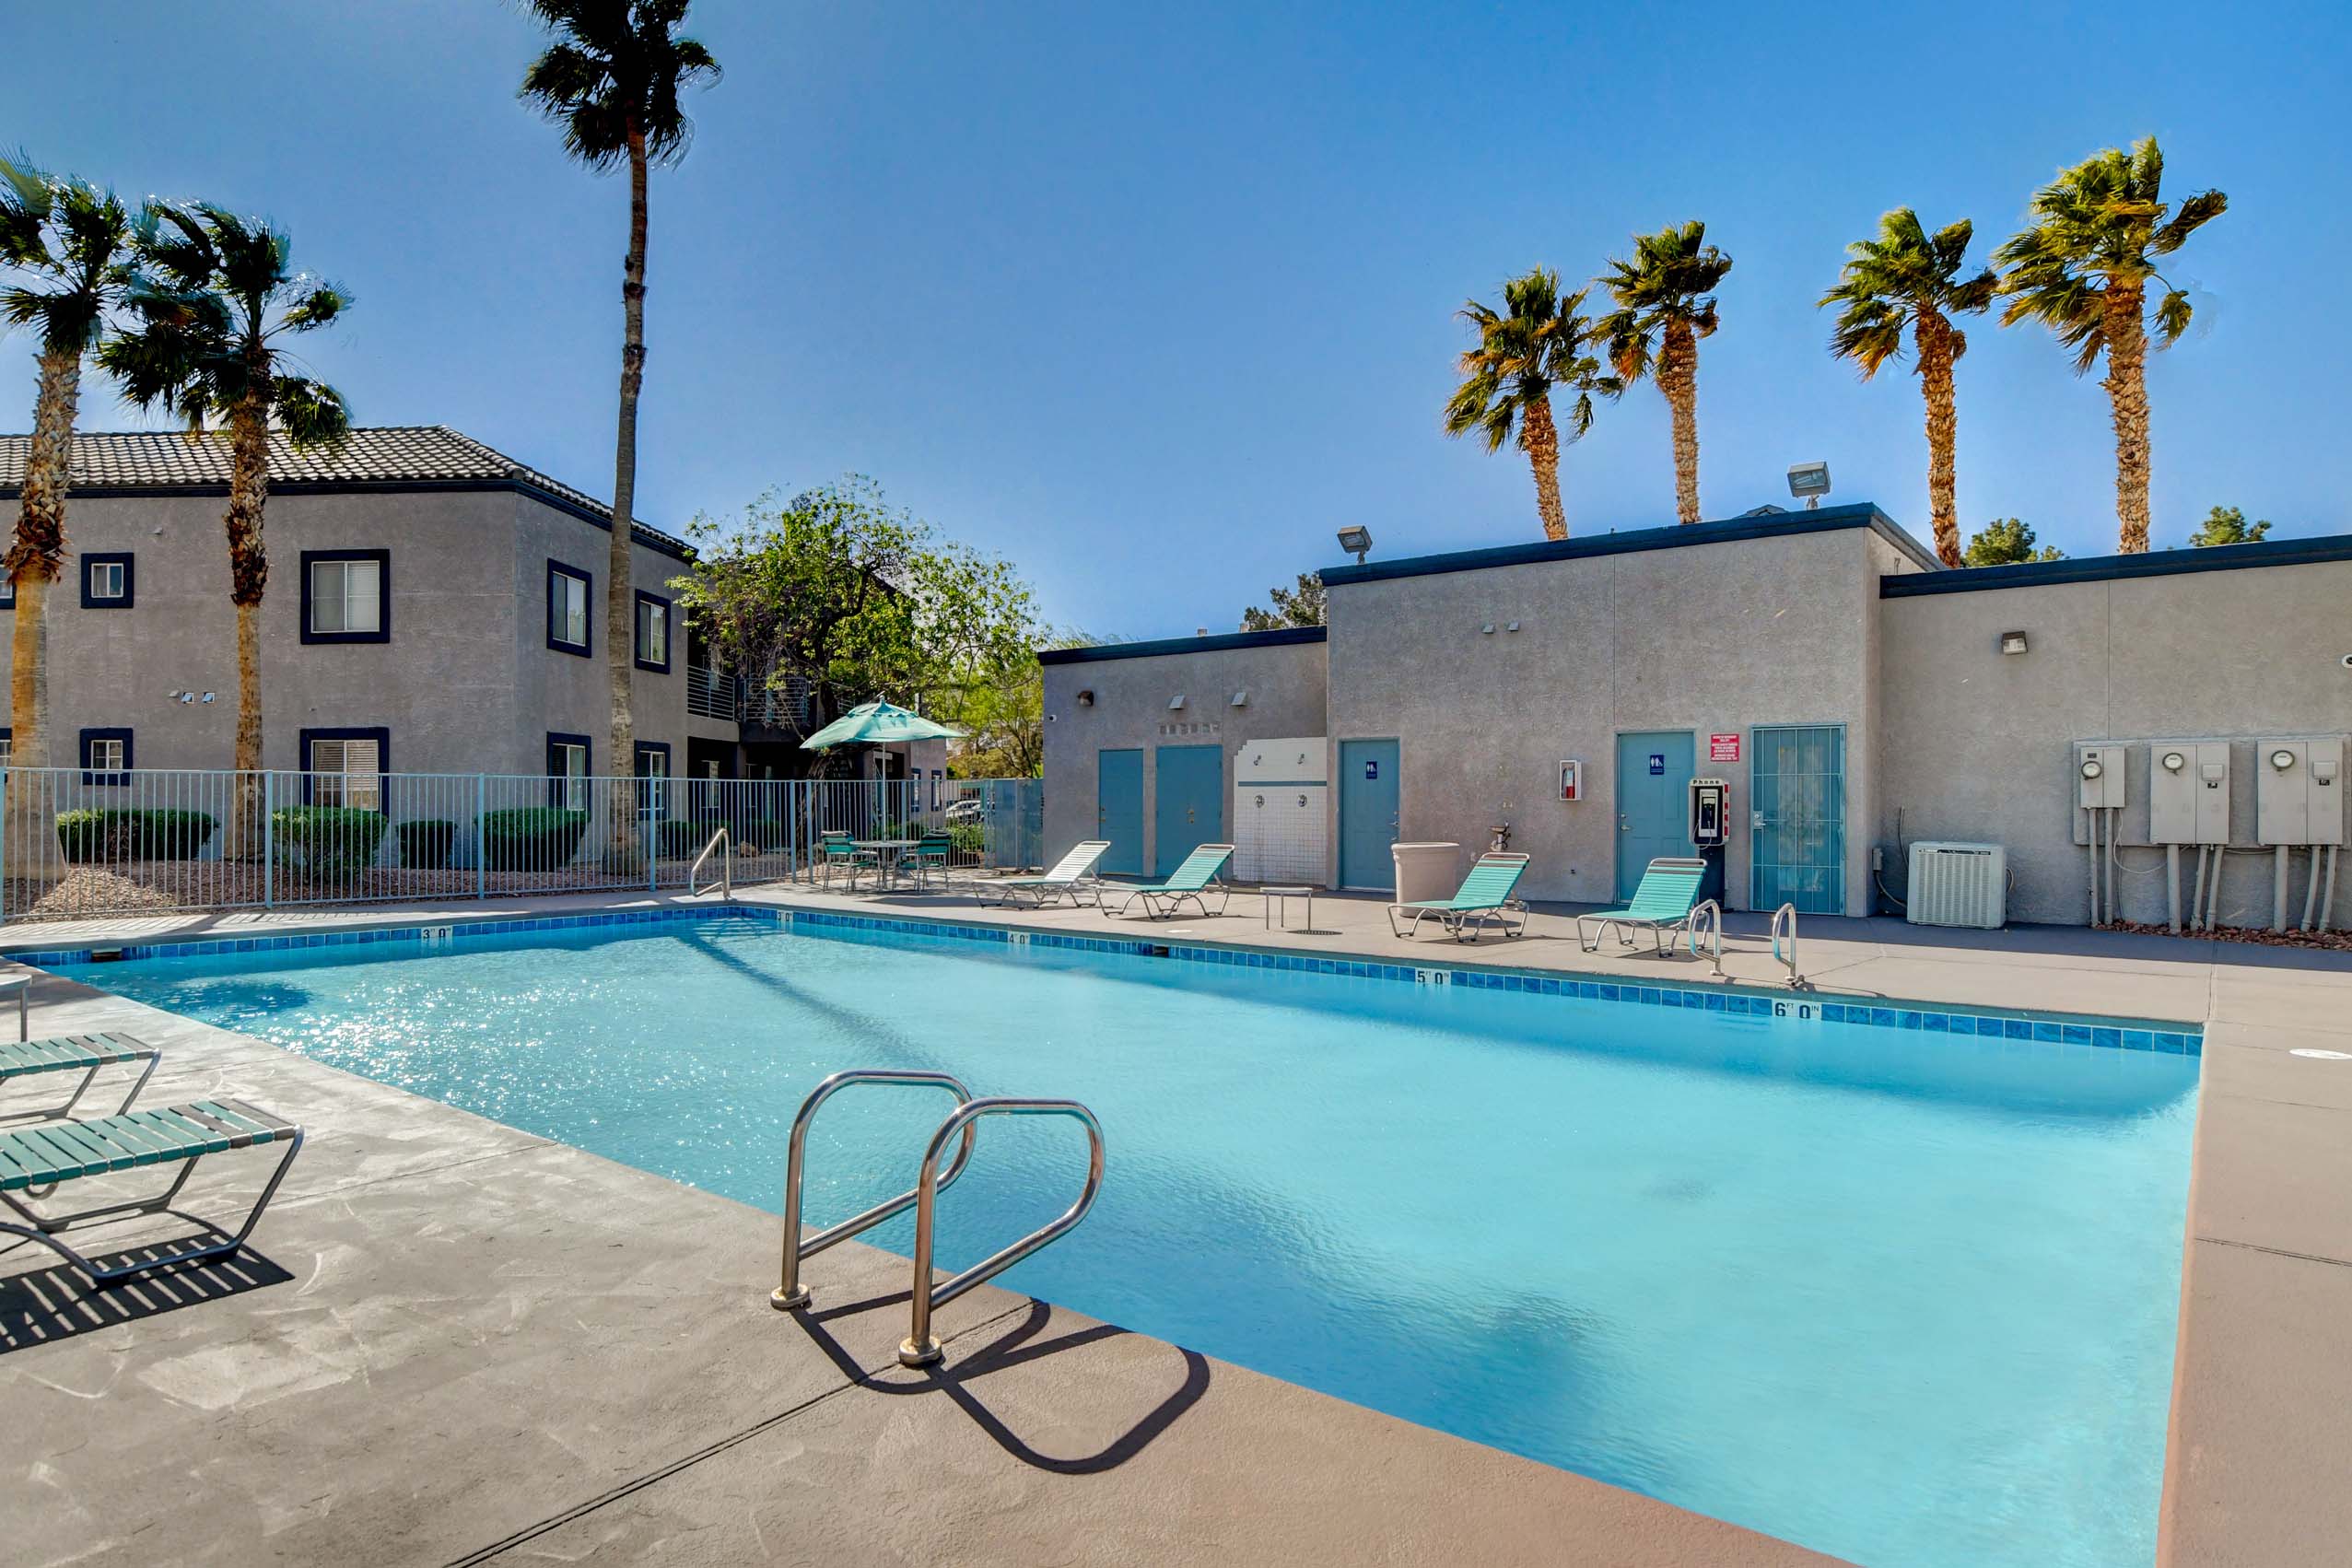 The 95 Apartments pool